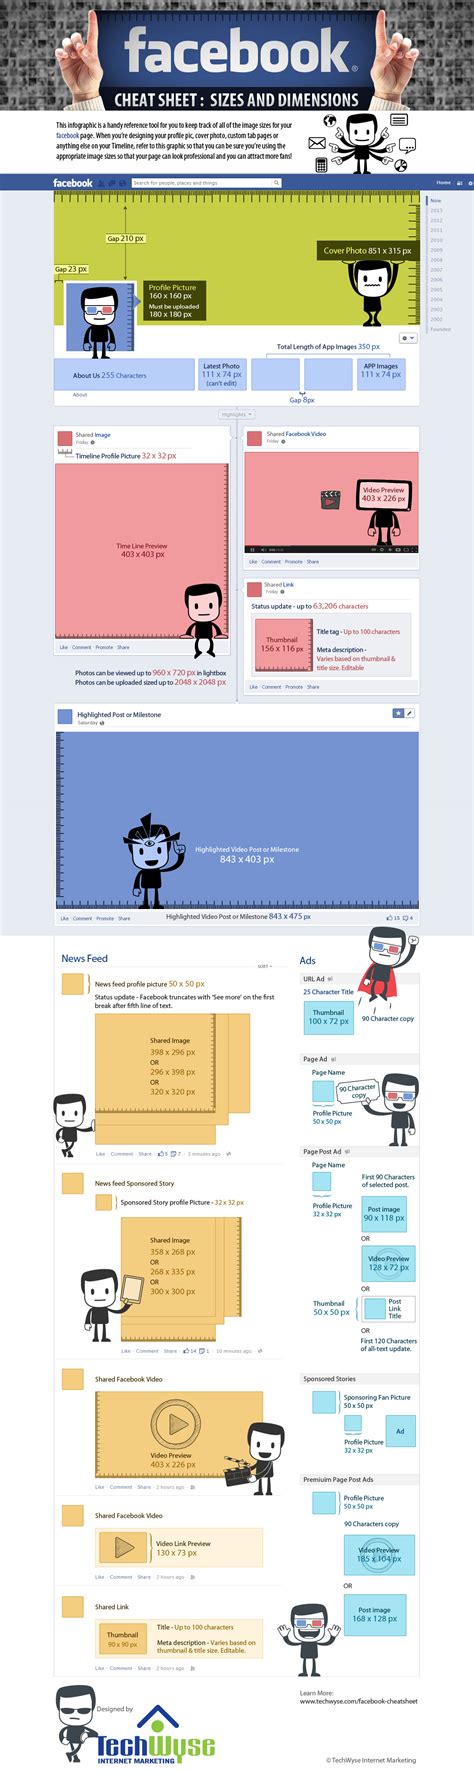 Infographic Of Facebook Image Sizes Cheat Sheet Socia